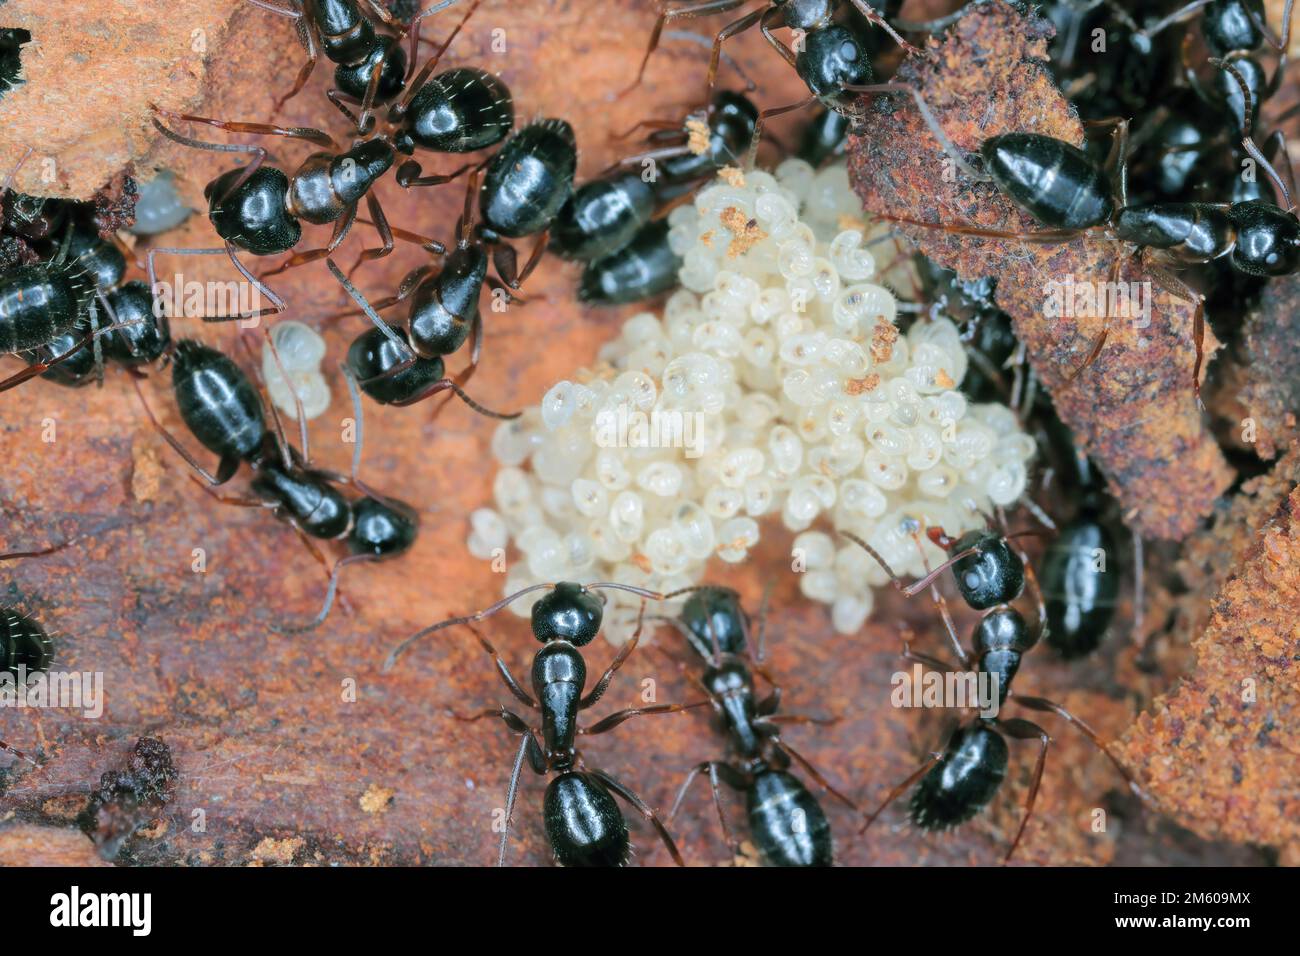 Black ants (Camponotus) under the bark of a dead tree caring for young larvae. Stock Photo